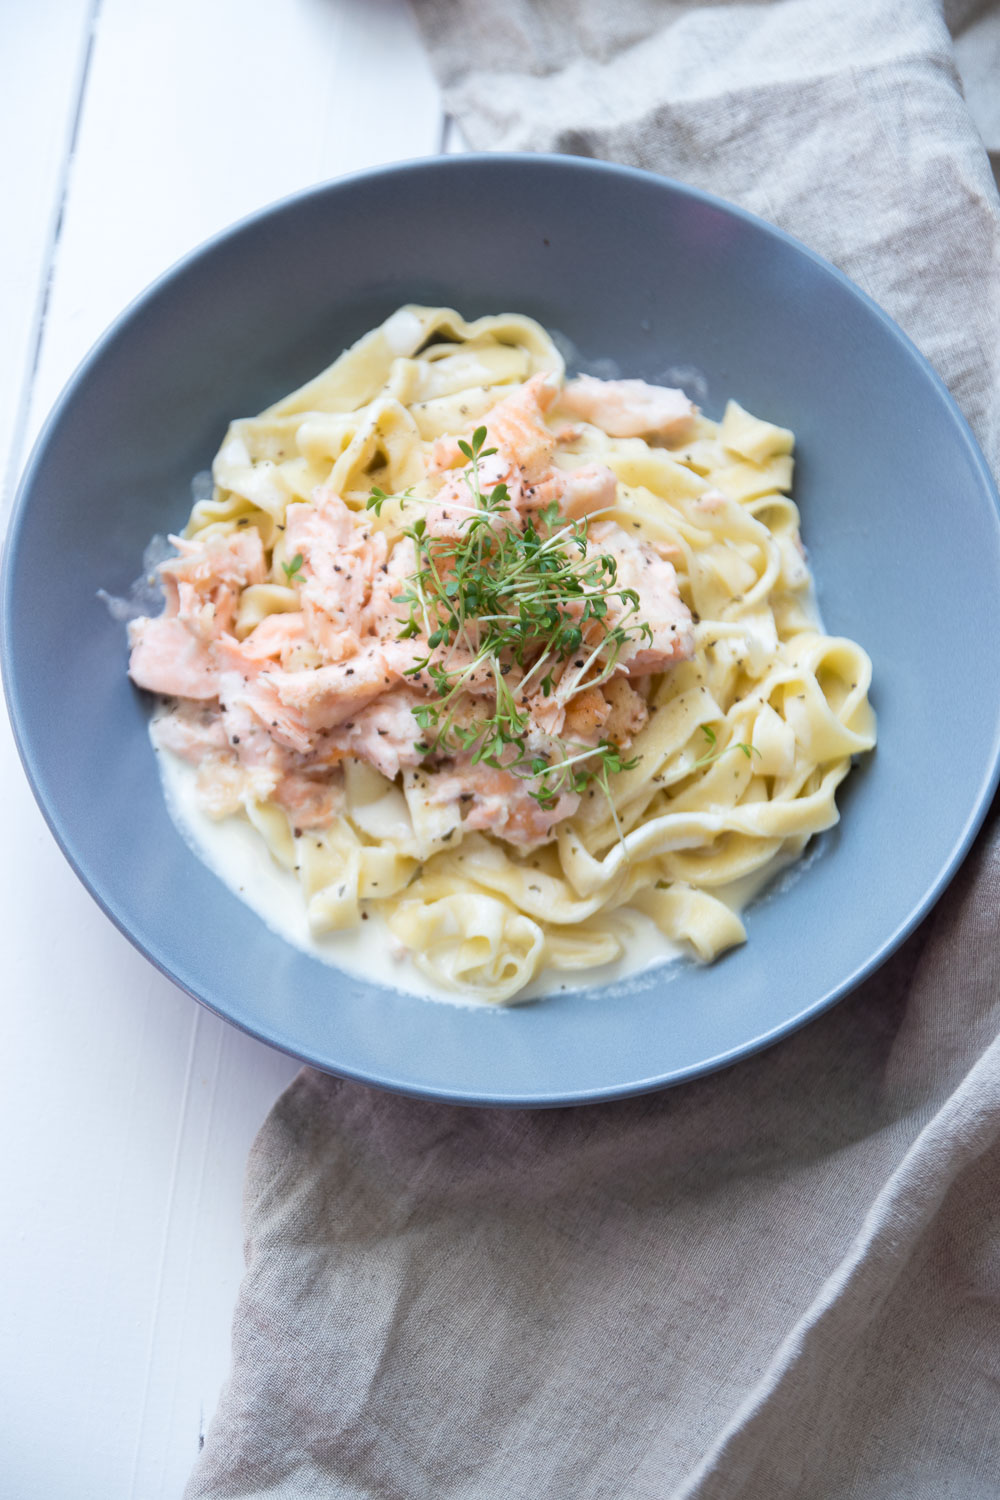 Homemade Action im Mai: selbstgemachte Nudeln mit Lachs - gooseberry ...